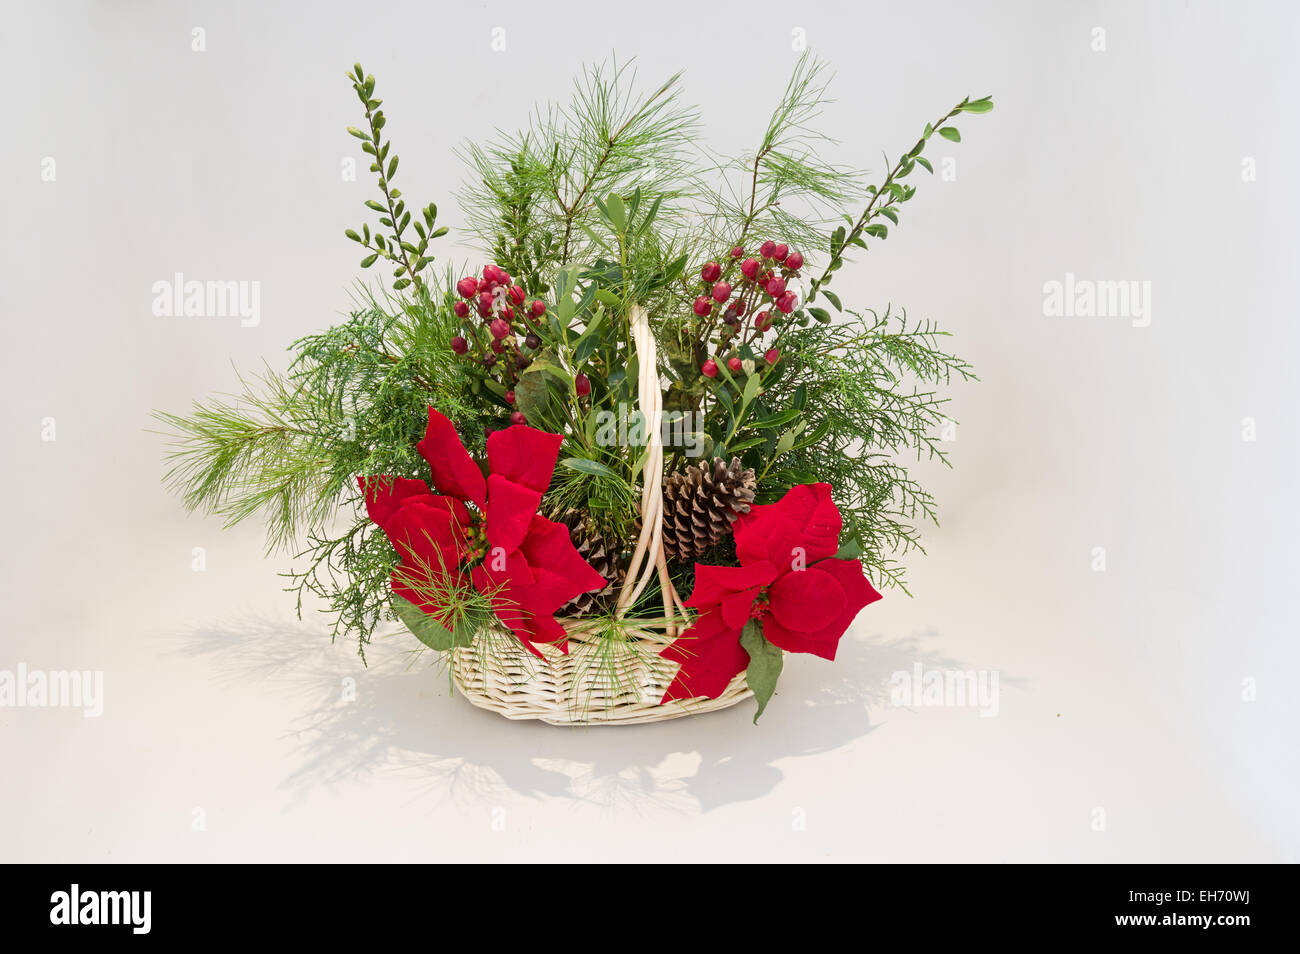 Christmas basket arrangement with poinsettia and evergreen greenery with light background Stock Photo